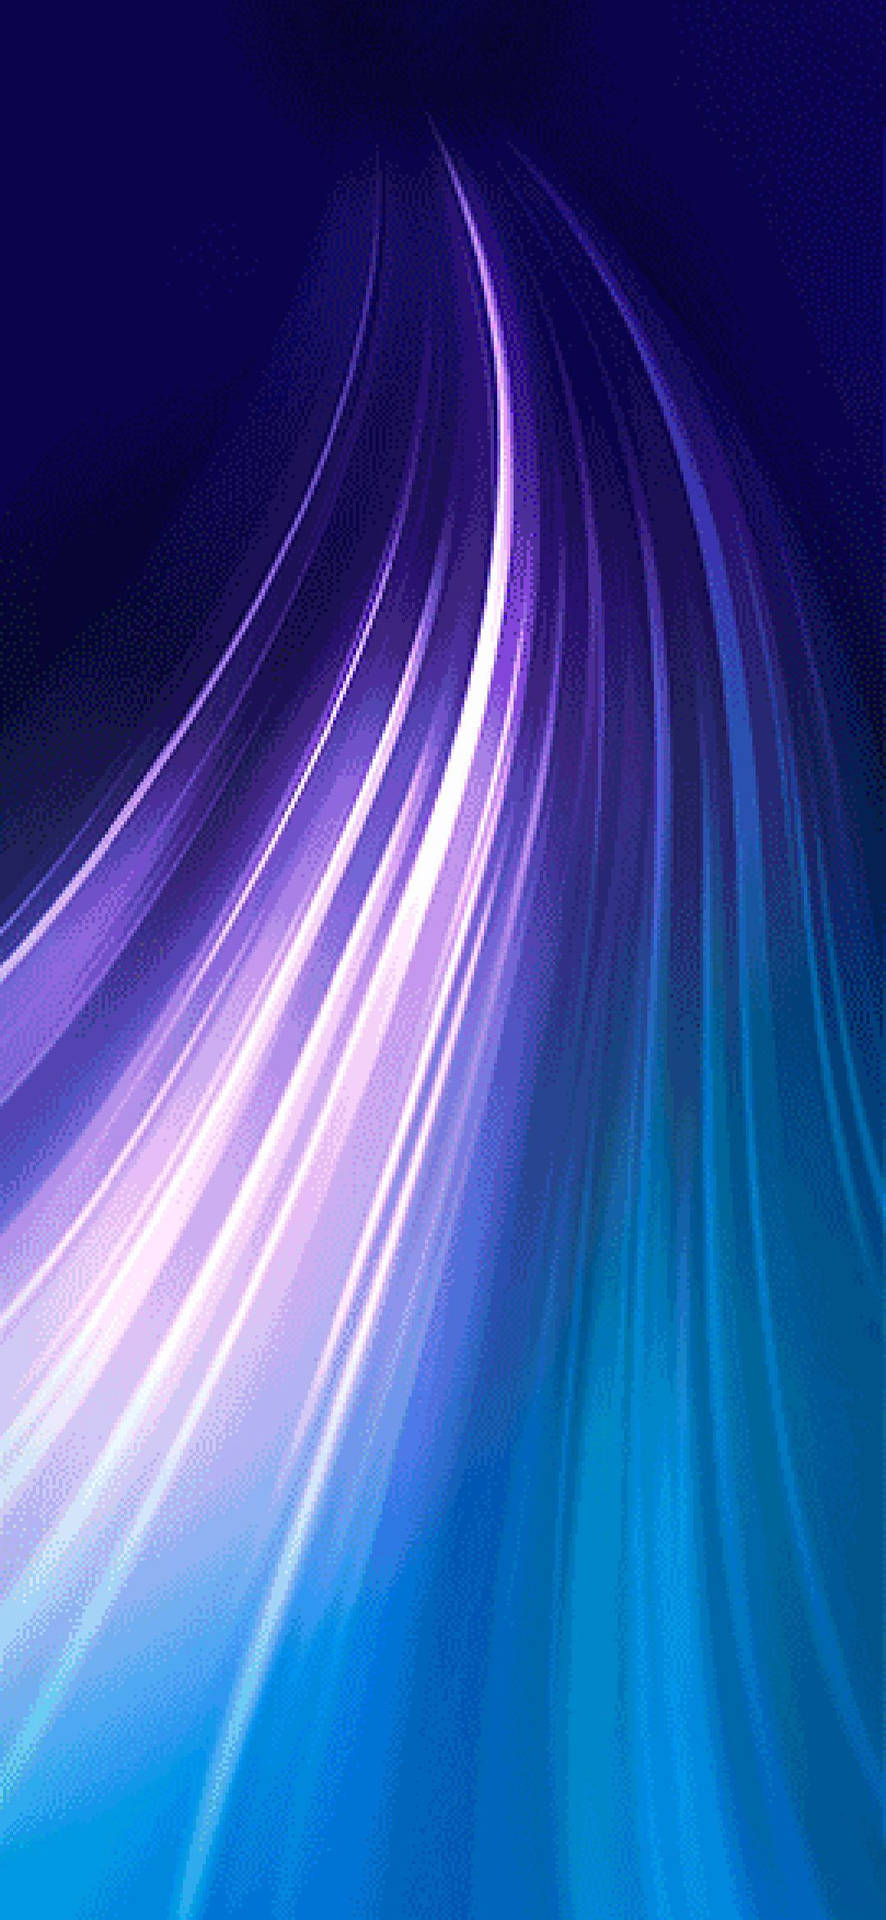 100+] Note 8 Wallpapers | Wallpapers.Com